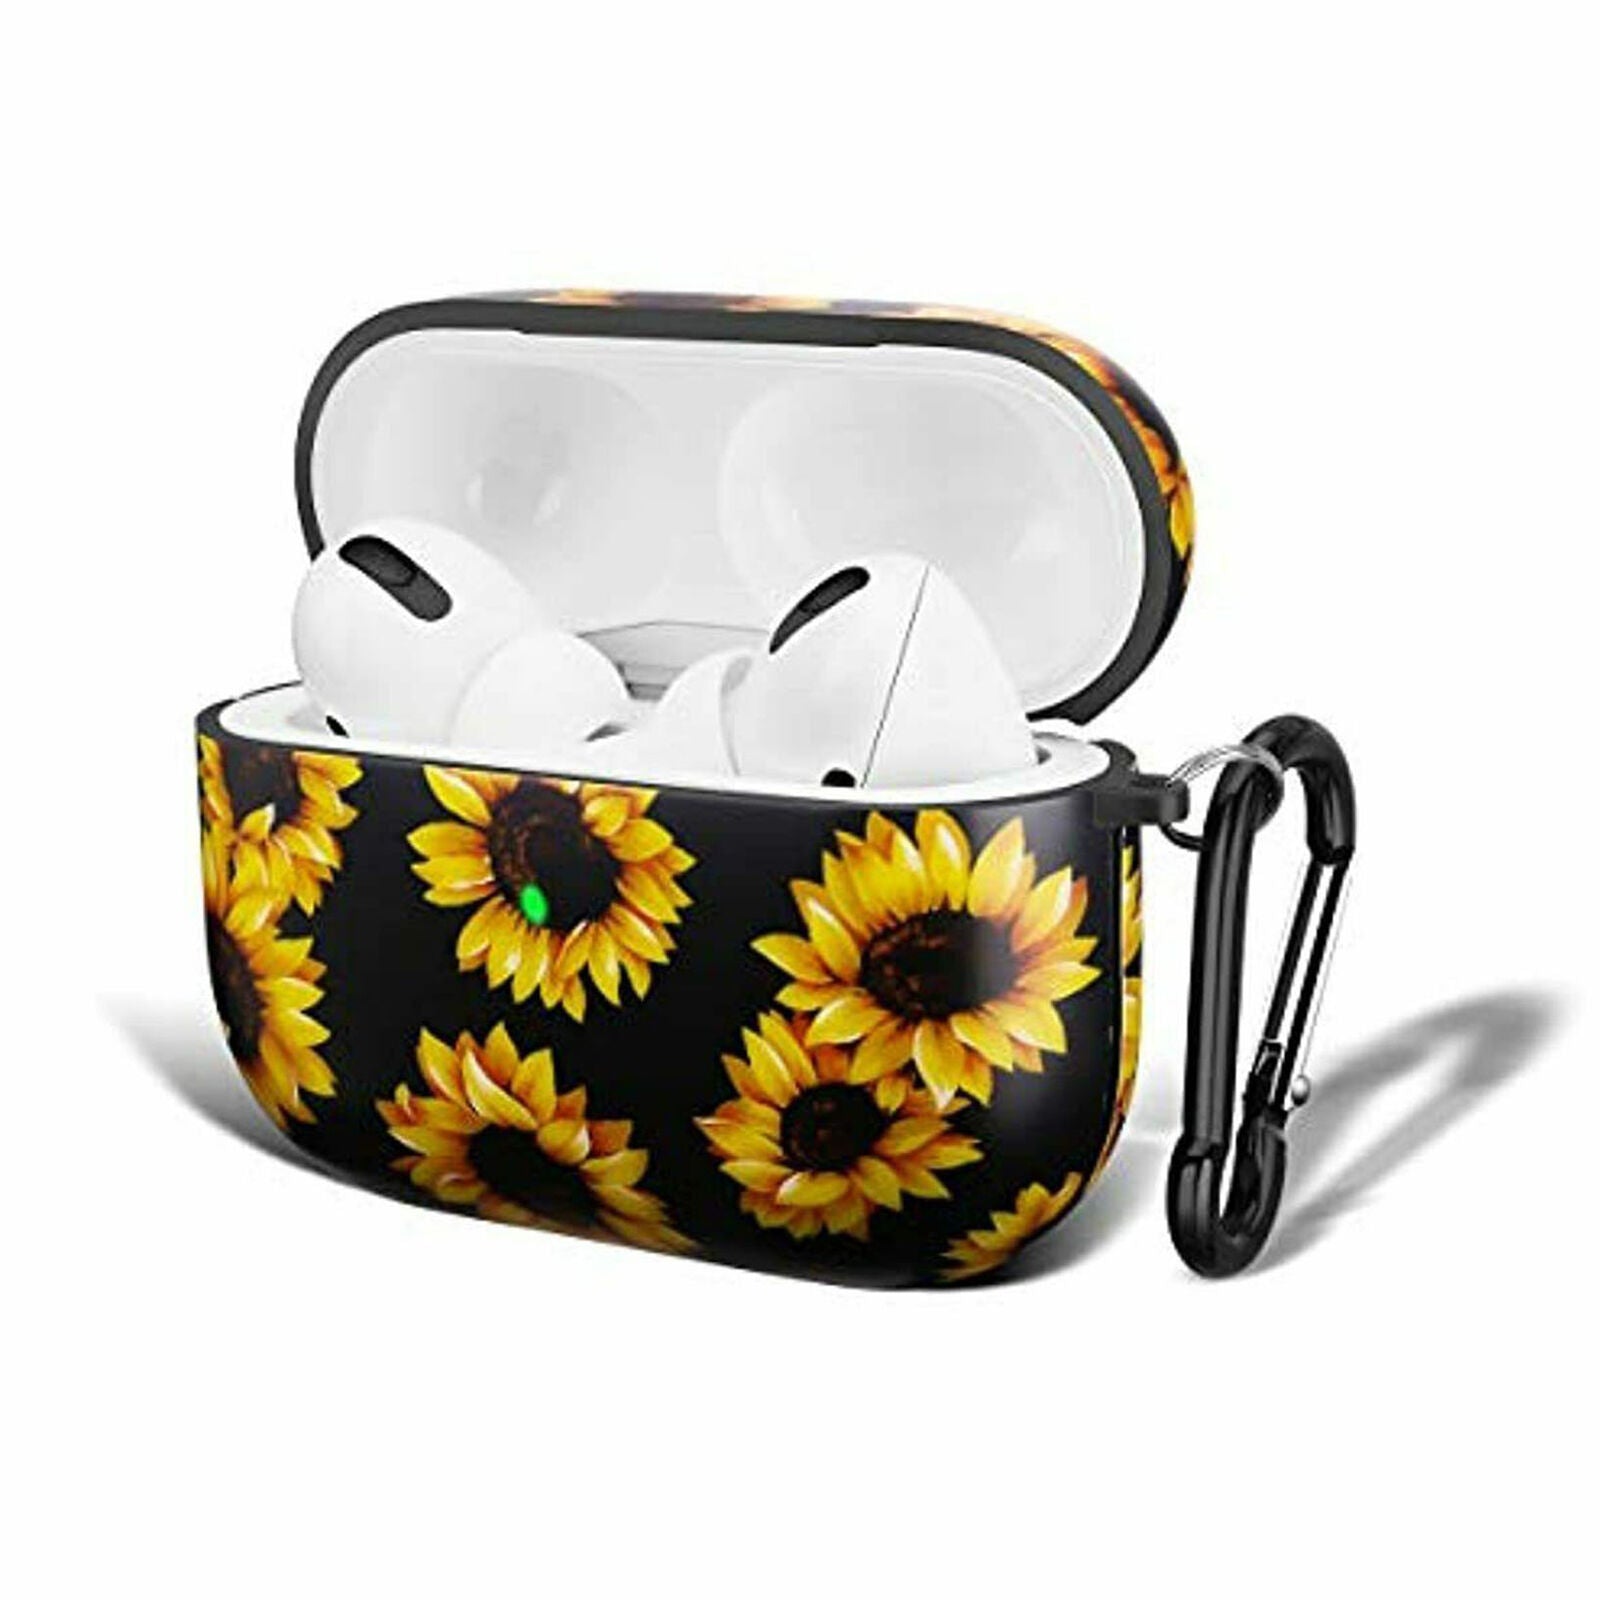 Sunflower Airpod Pro Case Flexible Silicone Cover Cute Flower Floral Yellow New